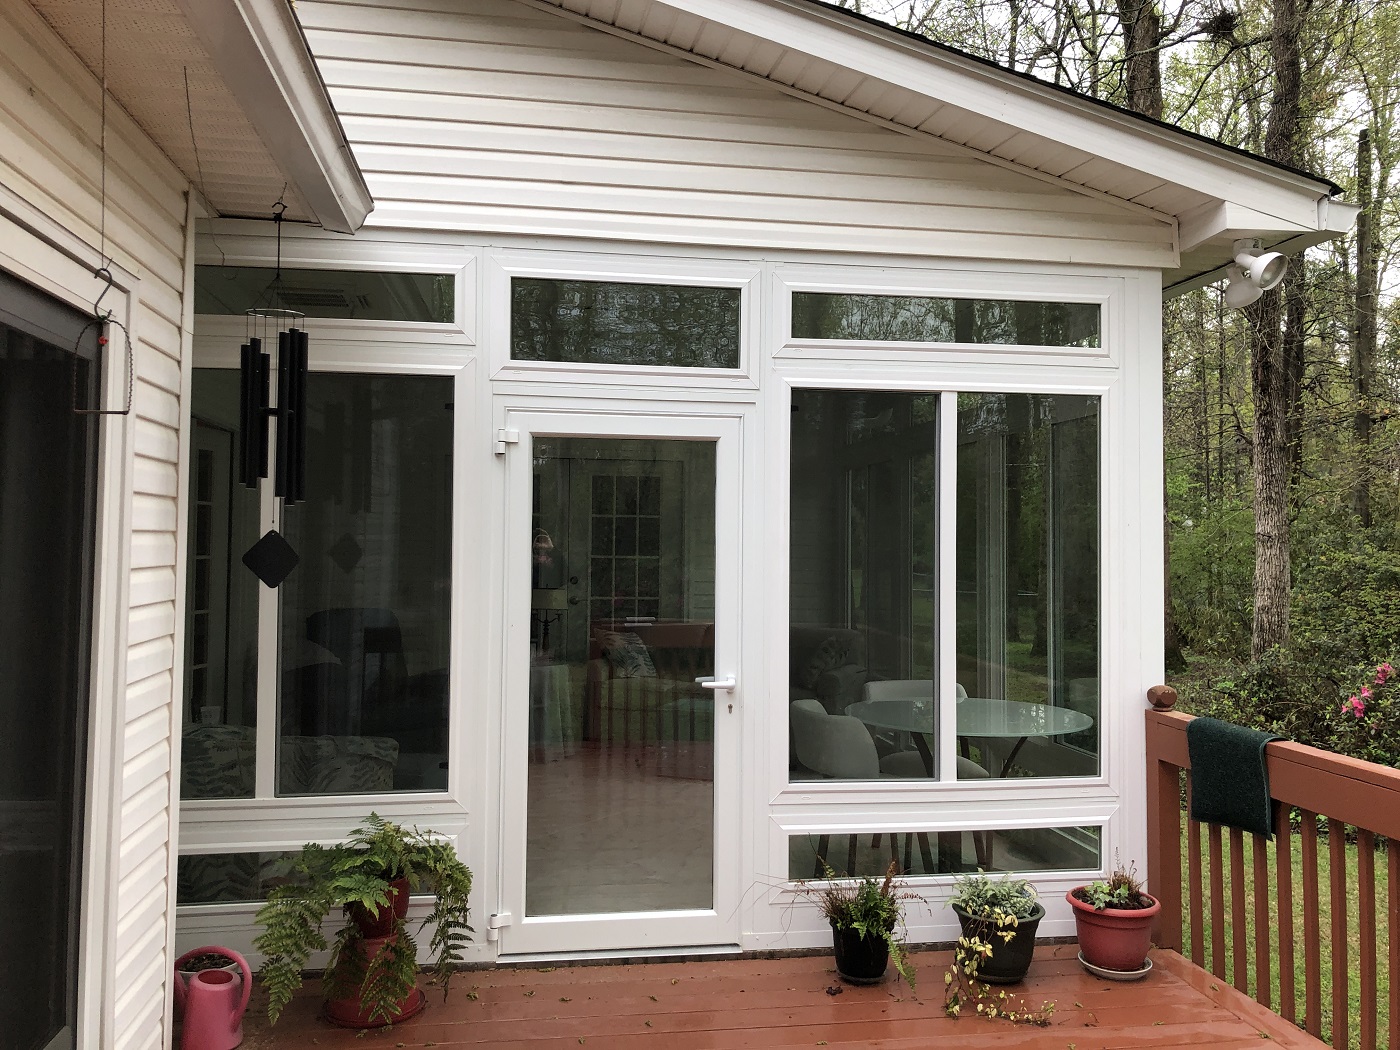 How A Sunroom Can Help You Beat The Heat And Still Enjoy The Outdoors This Summer.